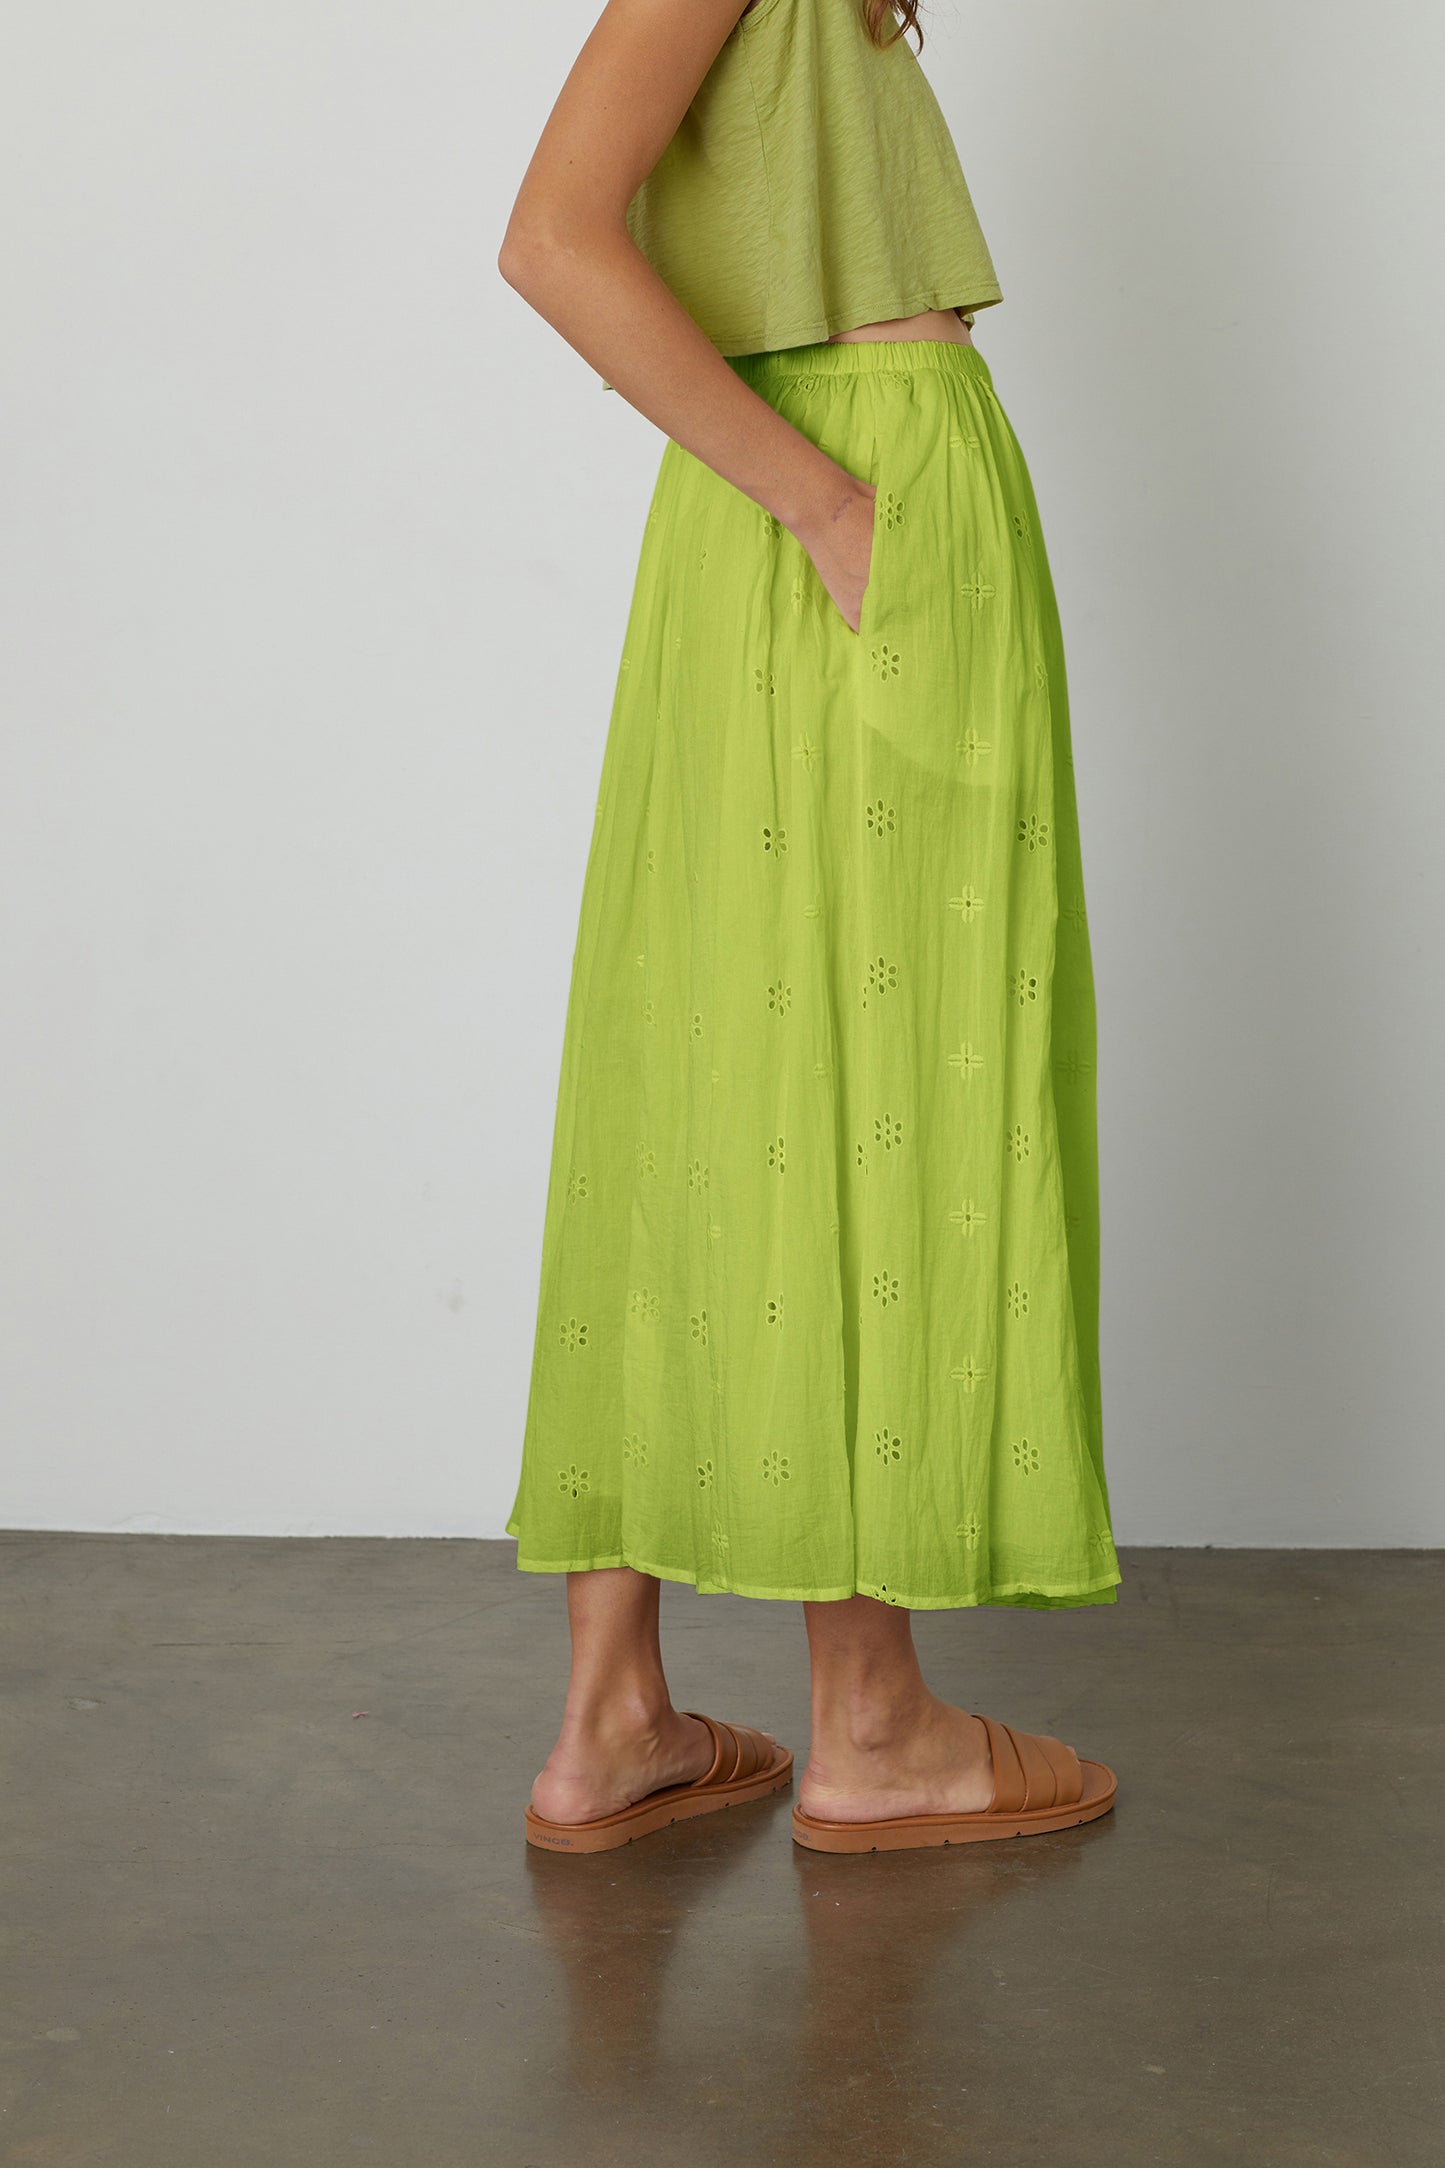 WYNNE COTTON EYELET MAXI SKIRT IN LIME